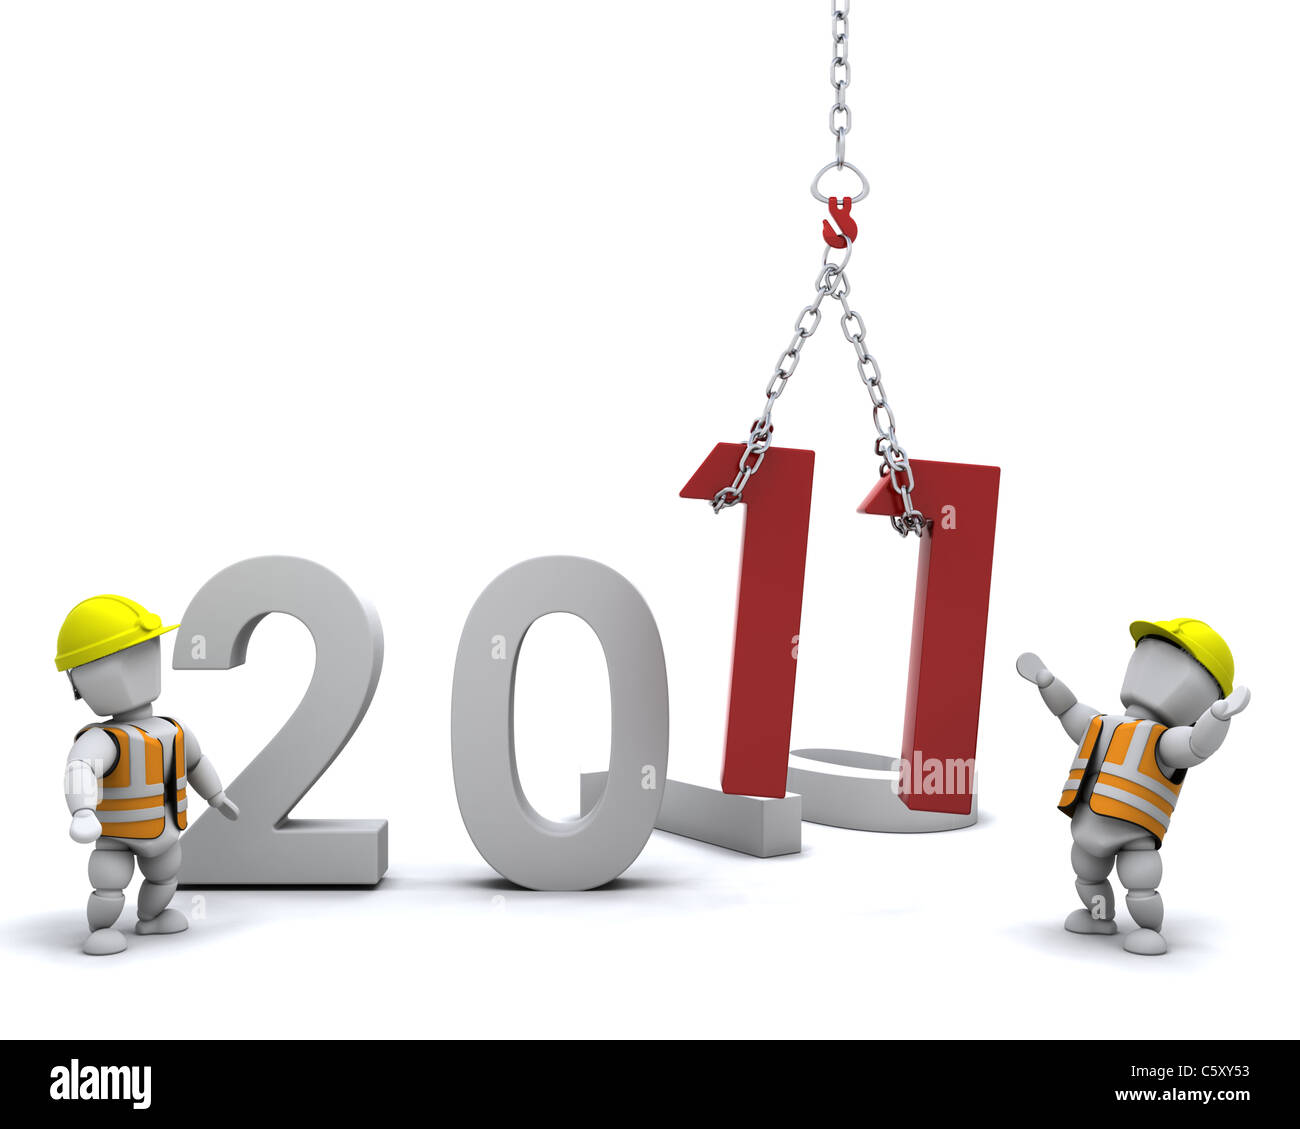 3D render depicting Bringing the new year in Stock Photo